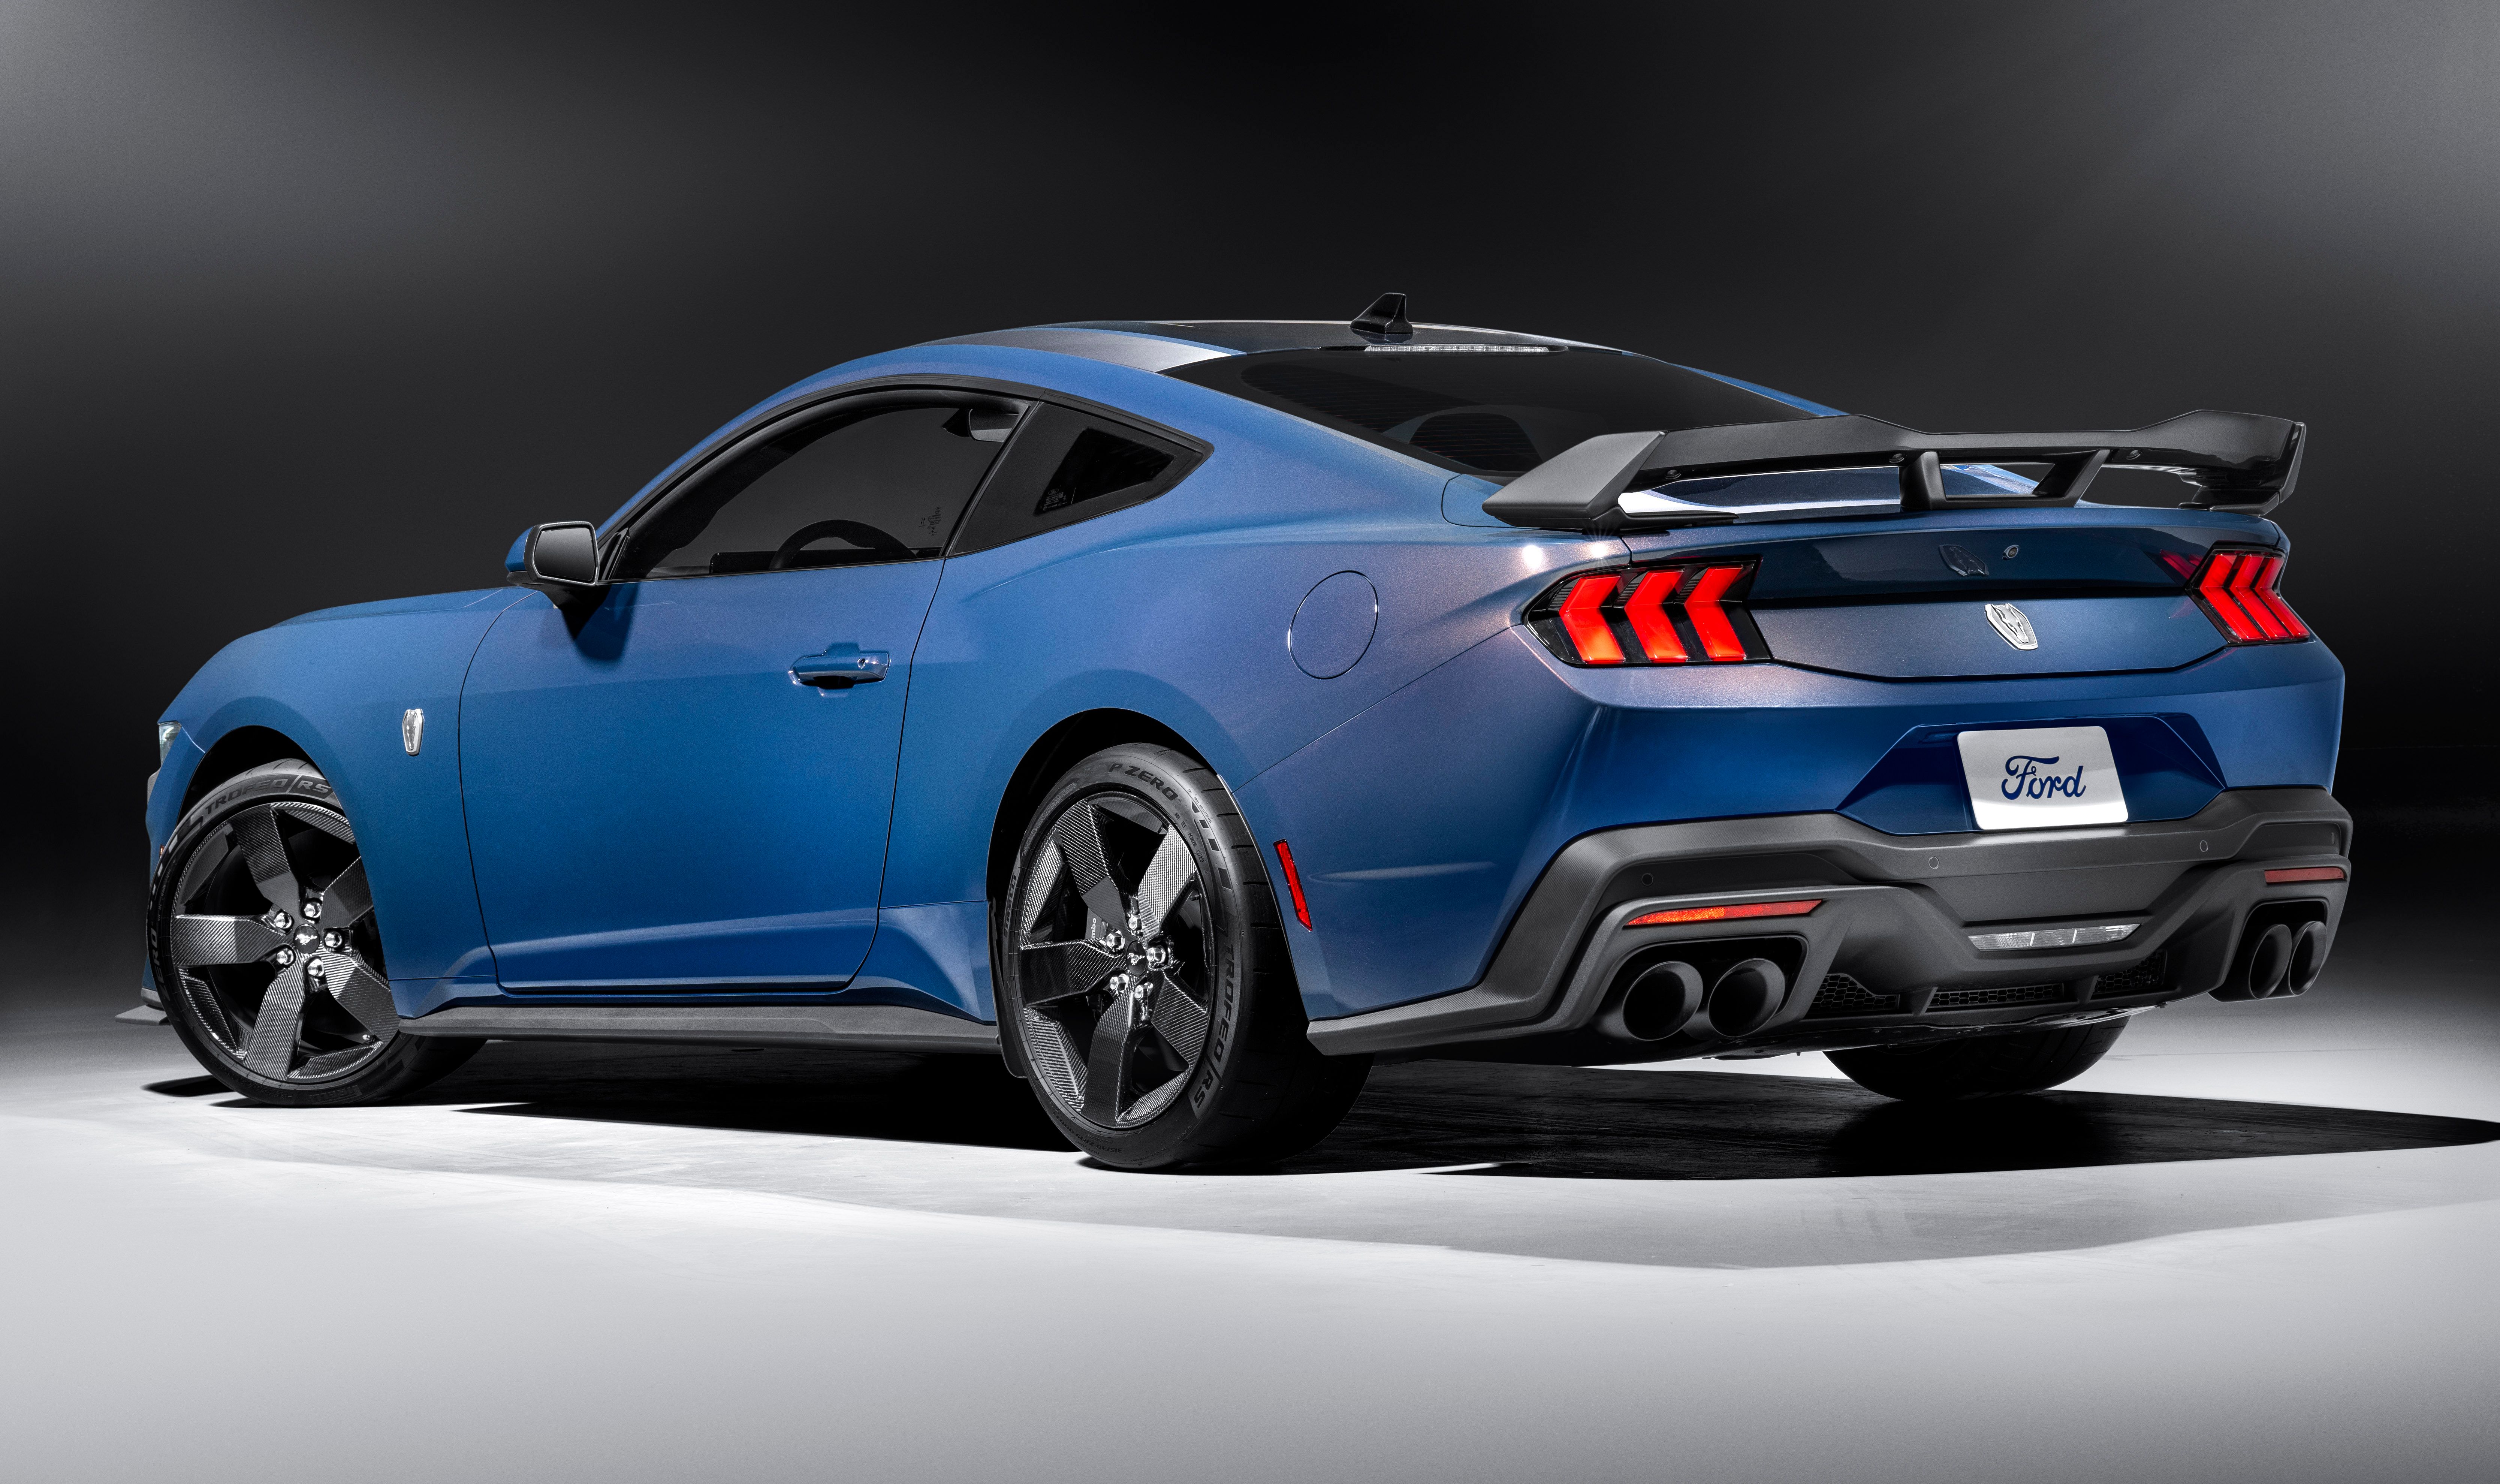 Back and side view of a blue Mustang Dark Horse with Carbon Fiber Wheels